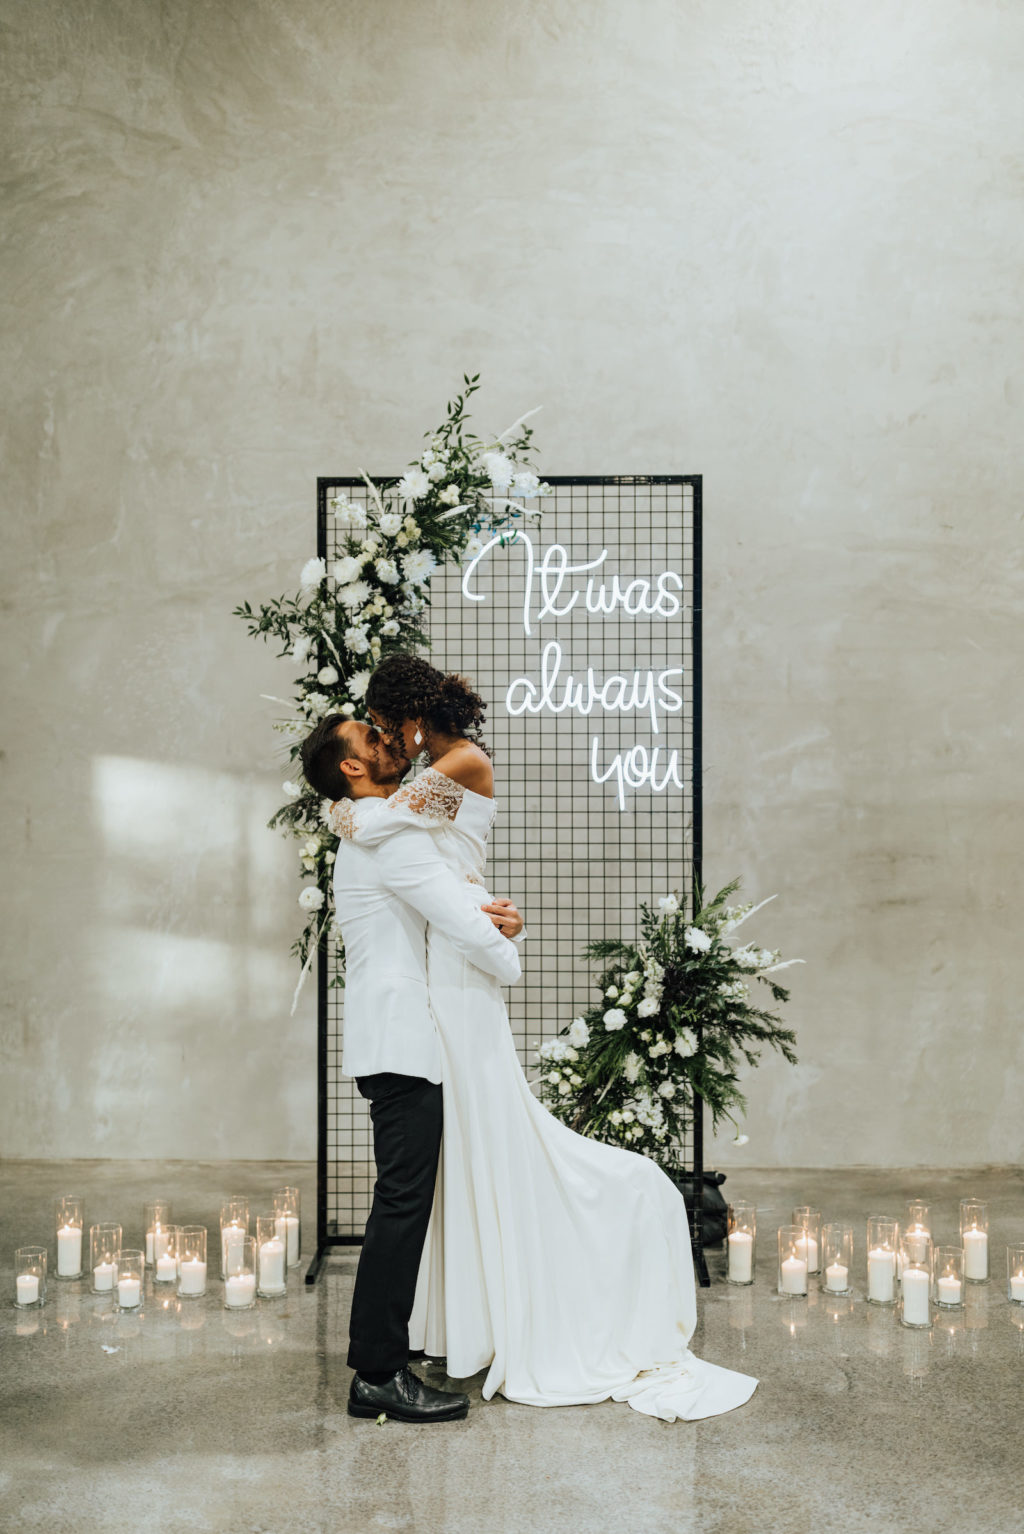 Black Modern Industrial Metal Screen Wedding Ceremony Backdrop Panel with Neon Sign, Candles, and Asymmetrical Floral Arrangements of White Roses and Winter Pine Greenery | Bride and Groom First Kiss | Groom Wearing Classic Formal White Jacket with Black Lapel and Bow Tie | Off the Shoulder Lace Sleeve Sheath Wedding Gown Bridal Dress | Amber McWhorter Photography